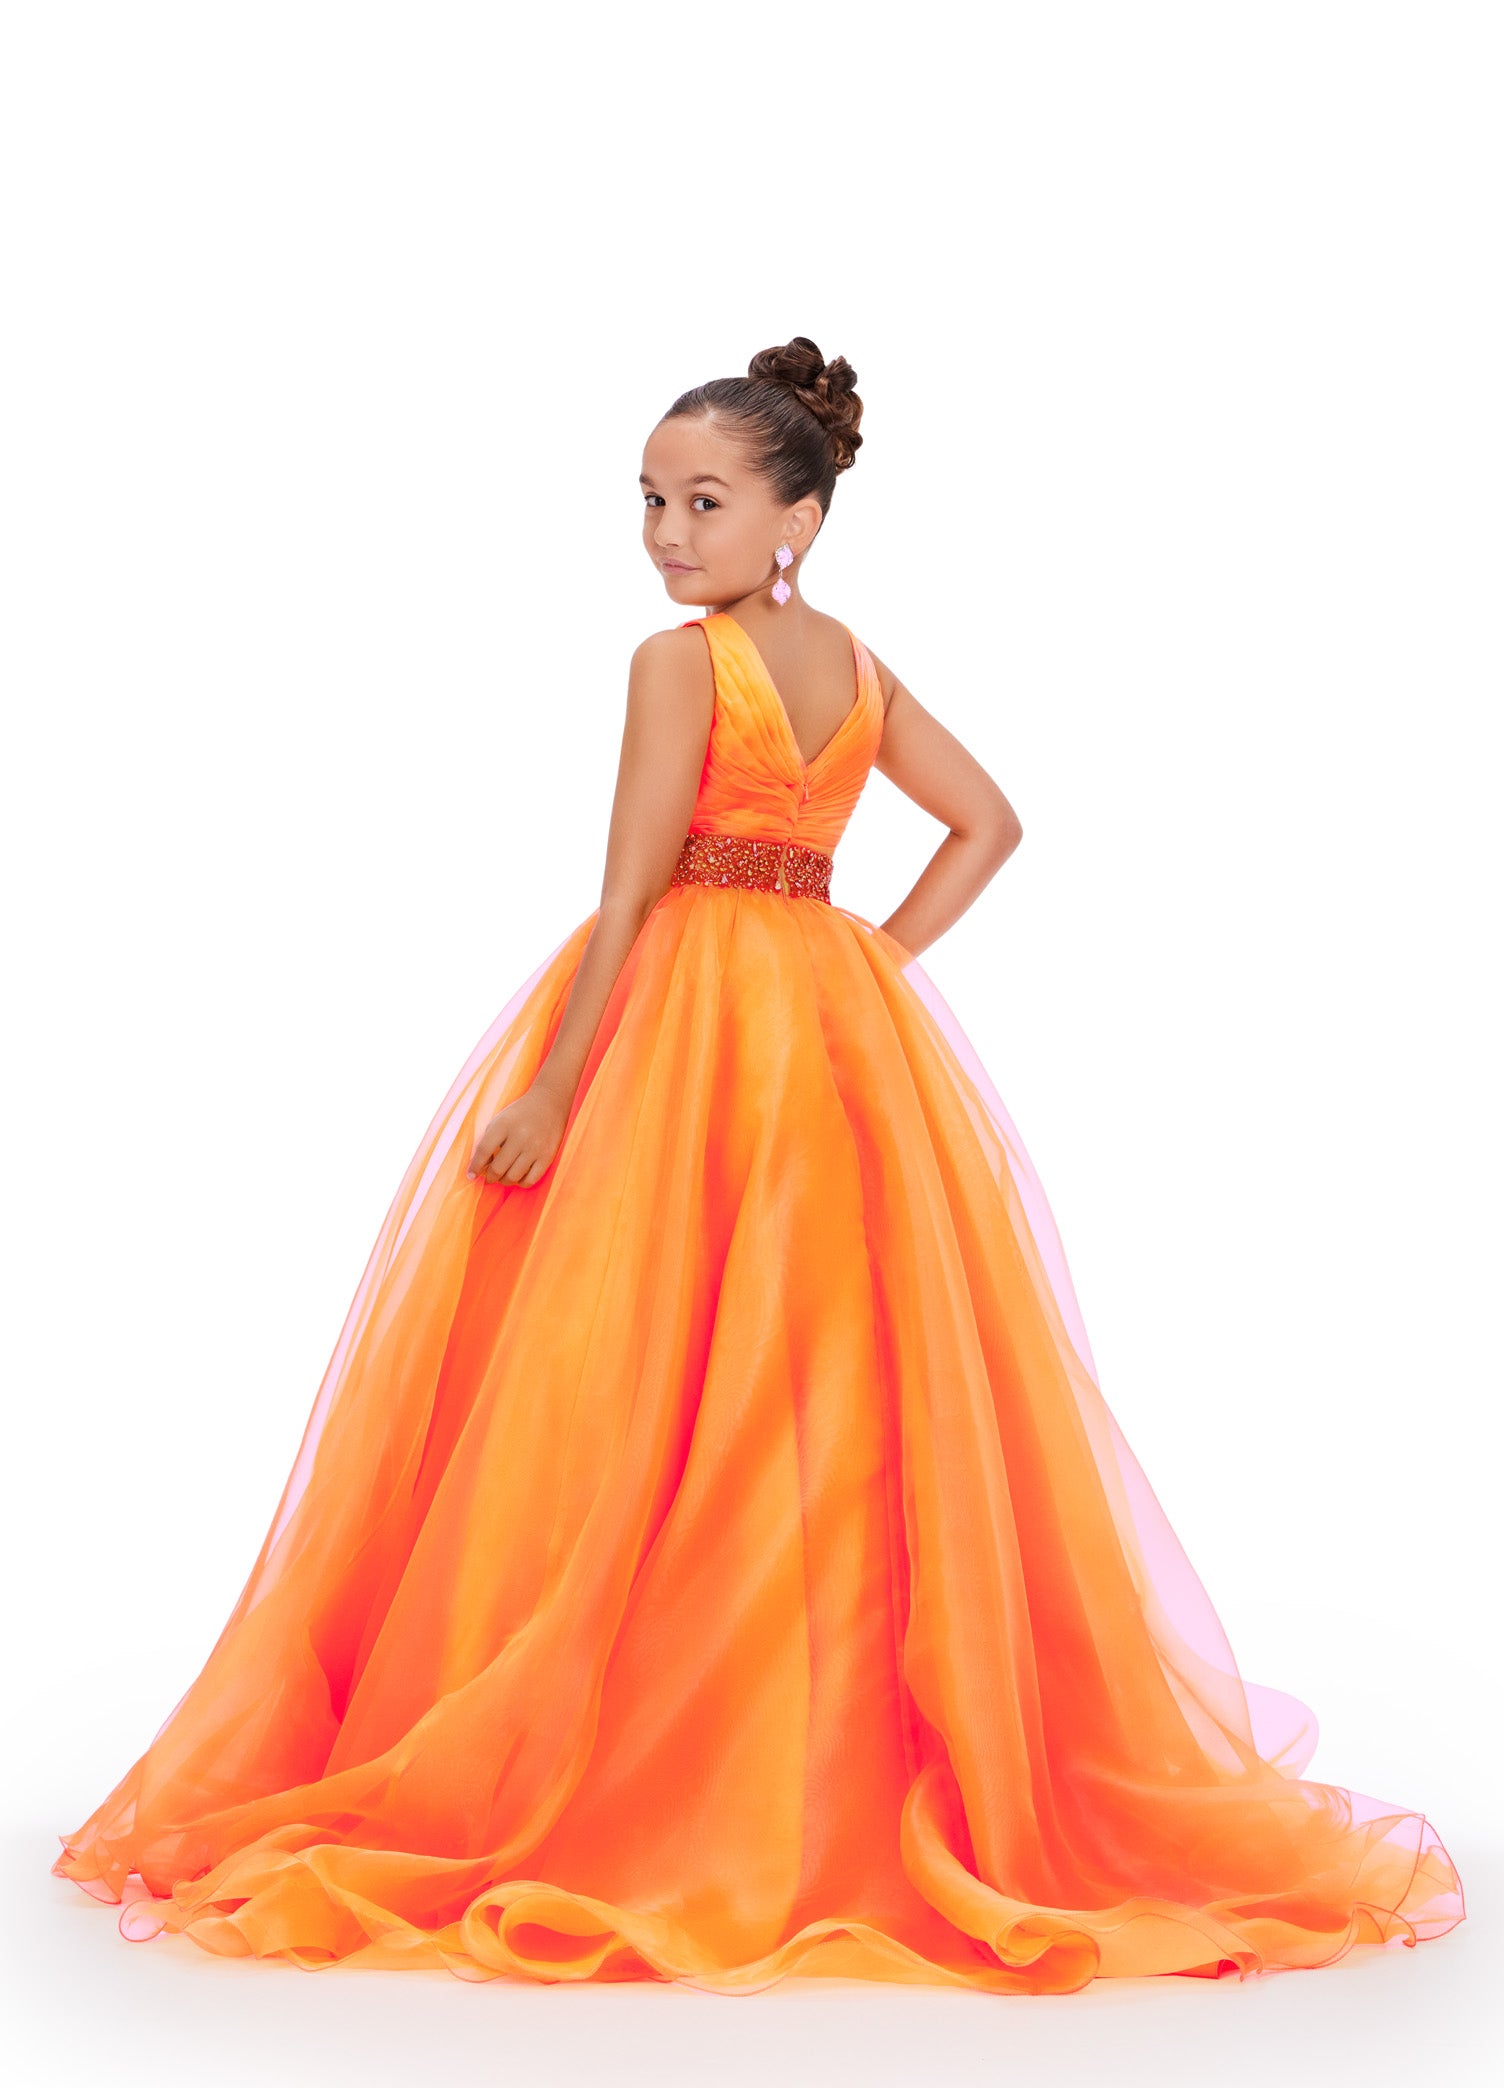 Expertly designed for young pageant contestants, the Ashley Lauren Kids 8249 dress combines a classic A-line silhouette with a modern V-neckline and sparkling crystal belt. Made from luxurious organza fabric, this dress is both elegant and comfortable, ensuring your child will look and feel their best on stage.